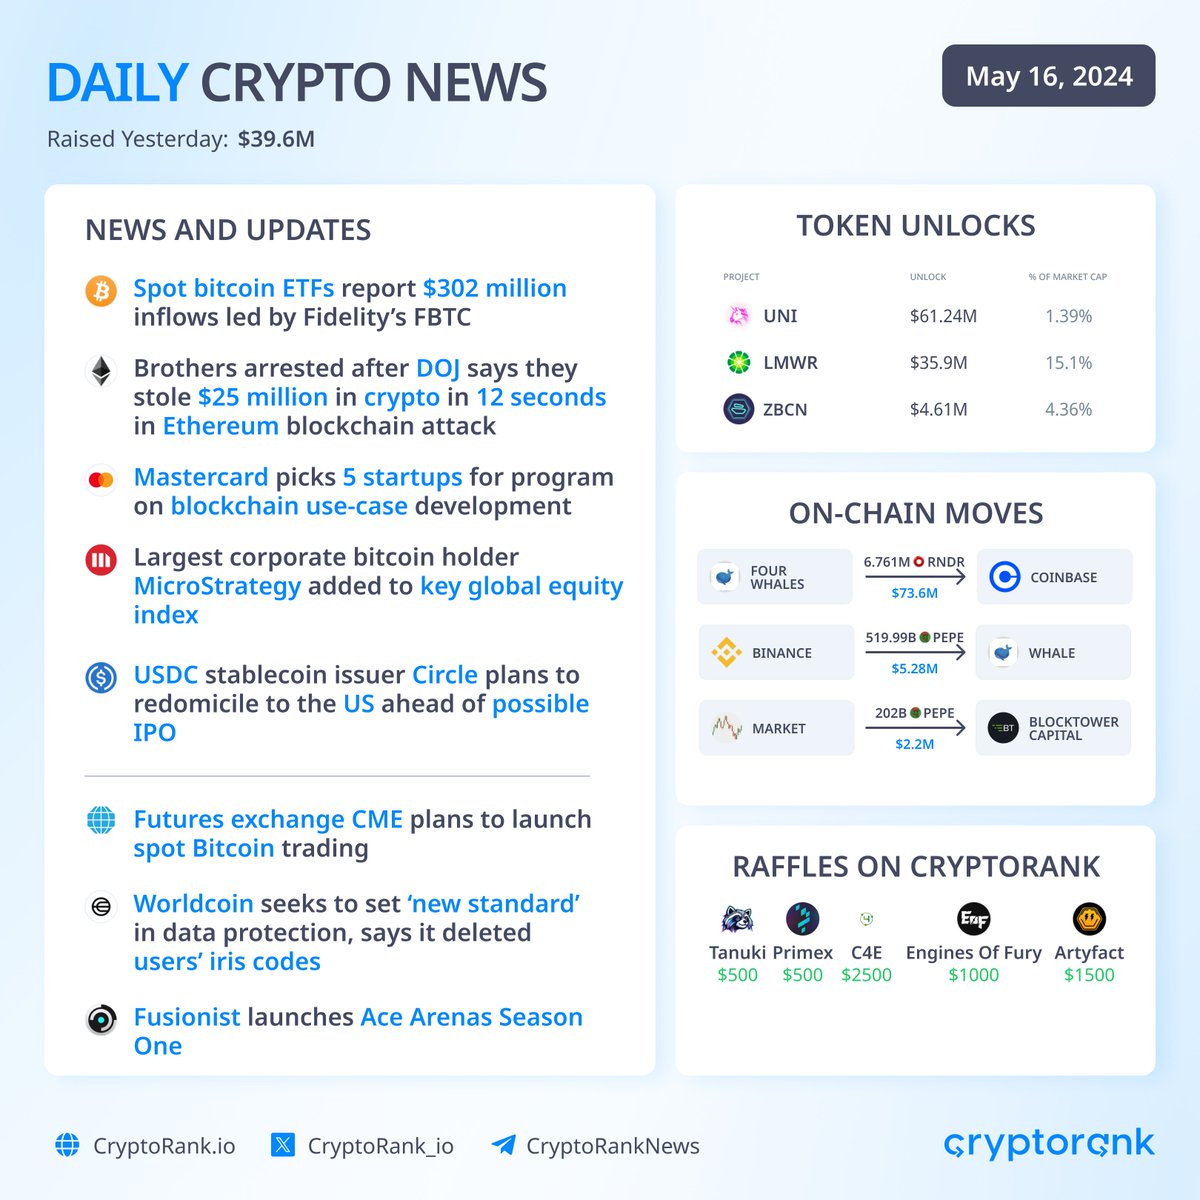 Daily Crypto News 📣 👉 News: — Spot #bitcoinETFs report $302 million inflows led by Fidelity’s $FBTC — Brothers arrested after DOJ says they stole $25 million in crypto in 12 seconds in #Ethereum blockchain attack — Mastercard picks five startups for program on blockchain